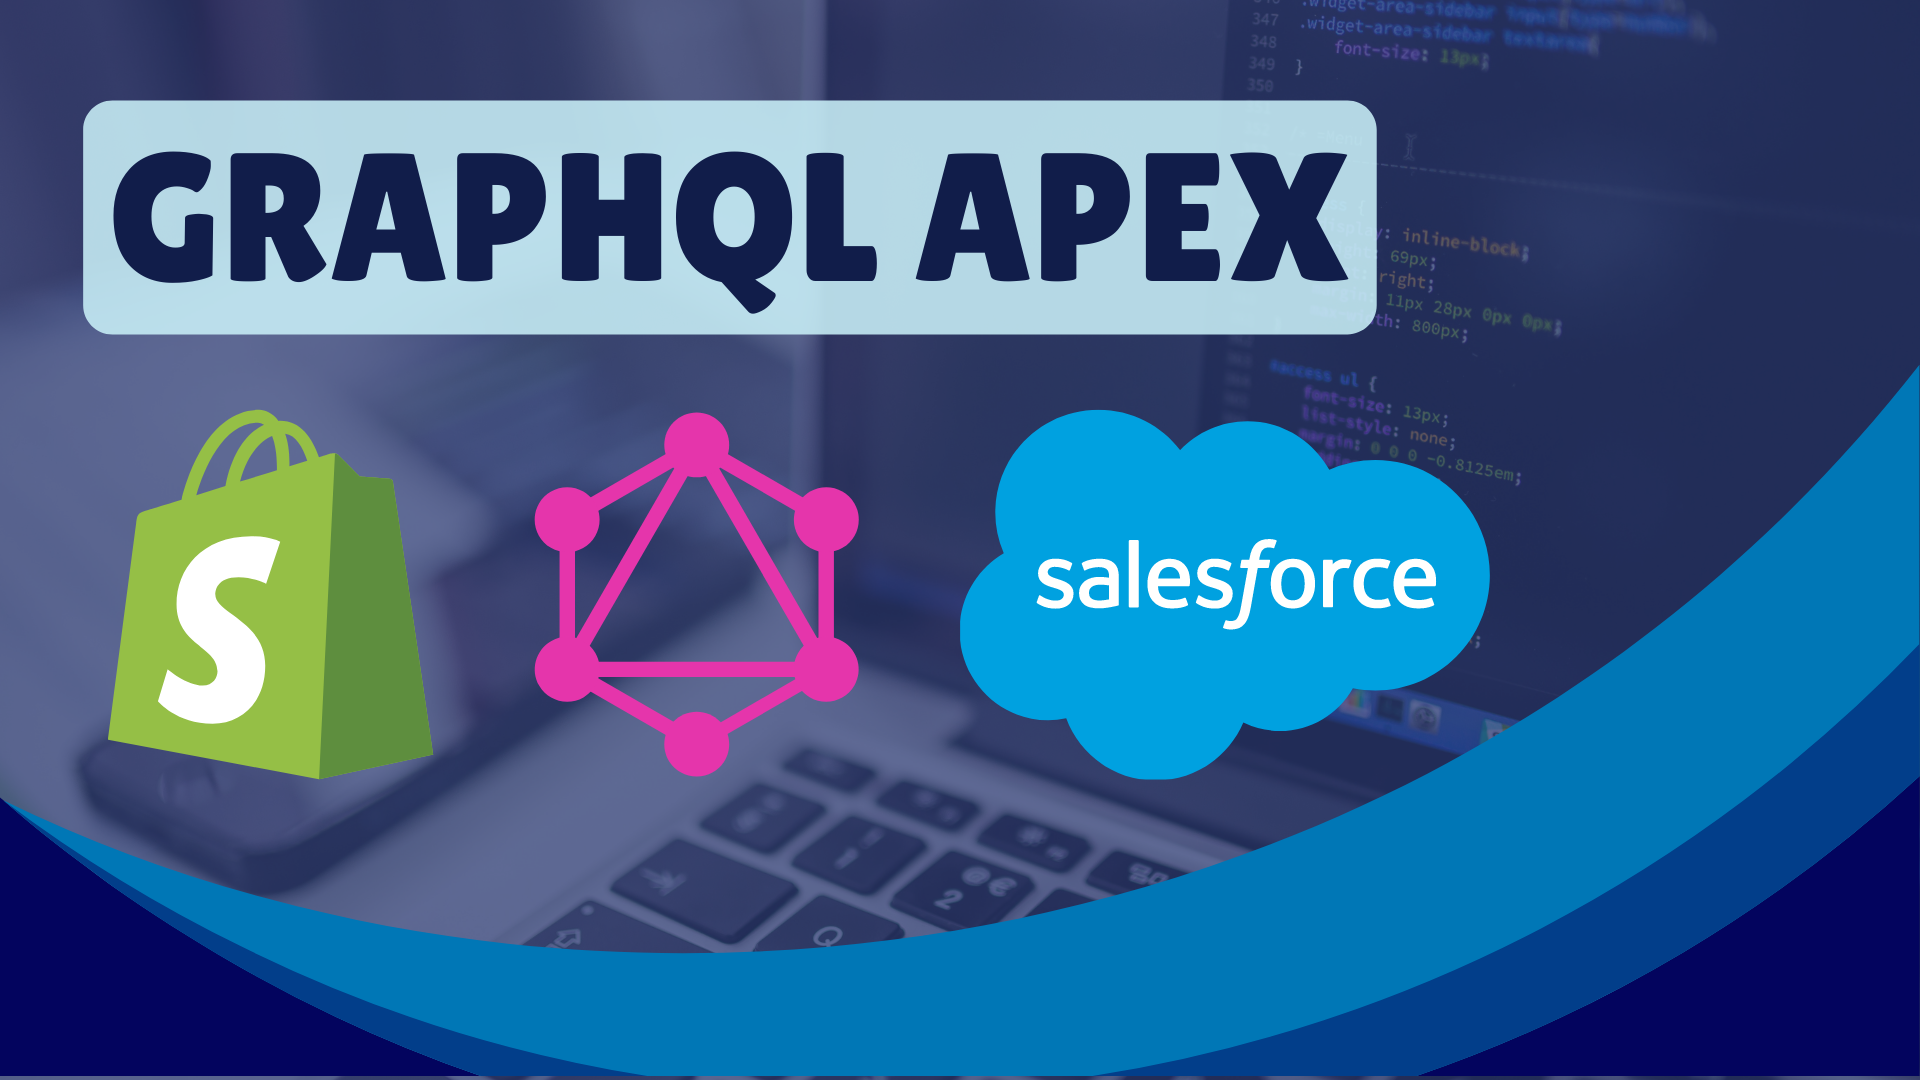 Learn how to leverage GraphQL in Salesforce with the GraphQL Apex Client. Discover the advantages of GraphQL over REST, implement streamlined data retrieval, mutations, and boost performance.